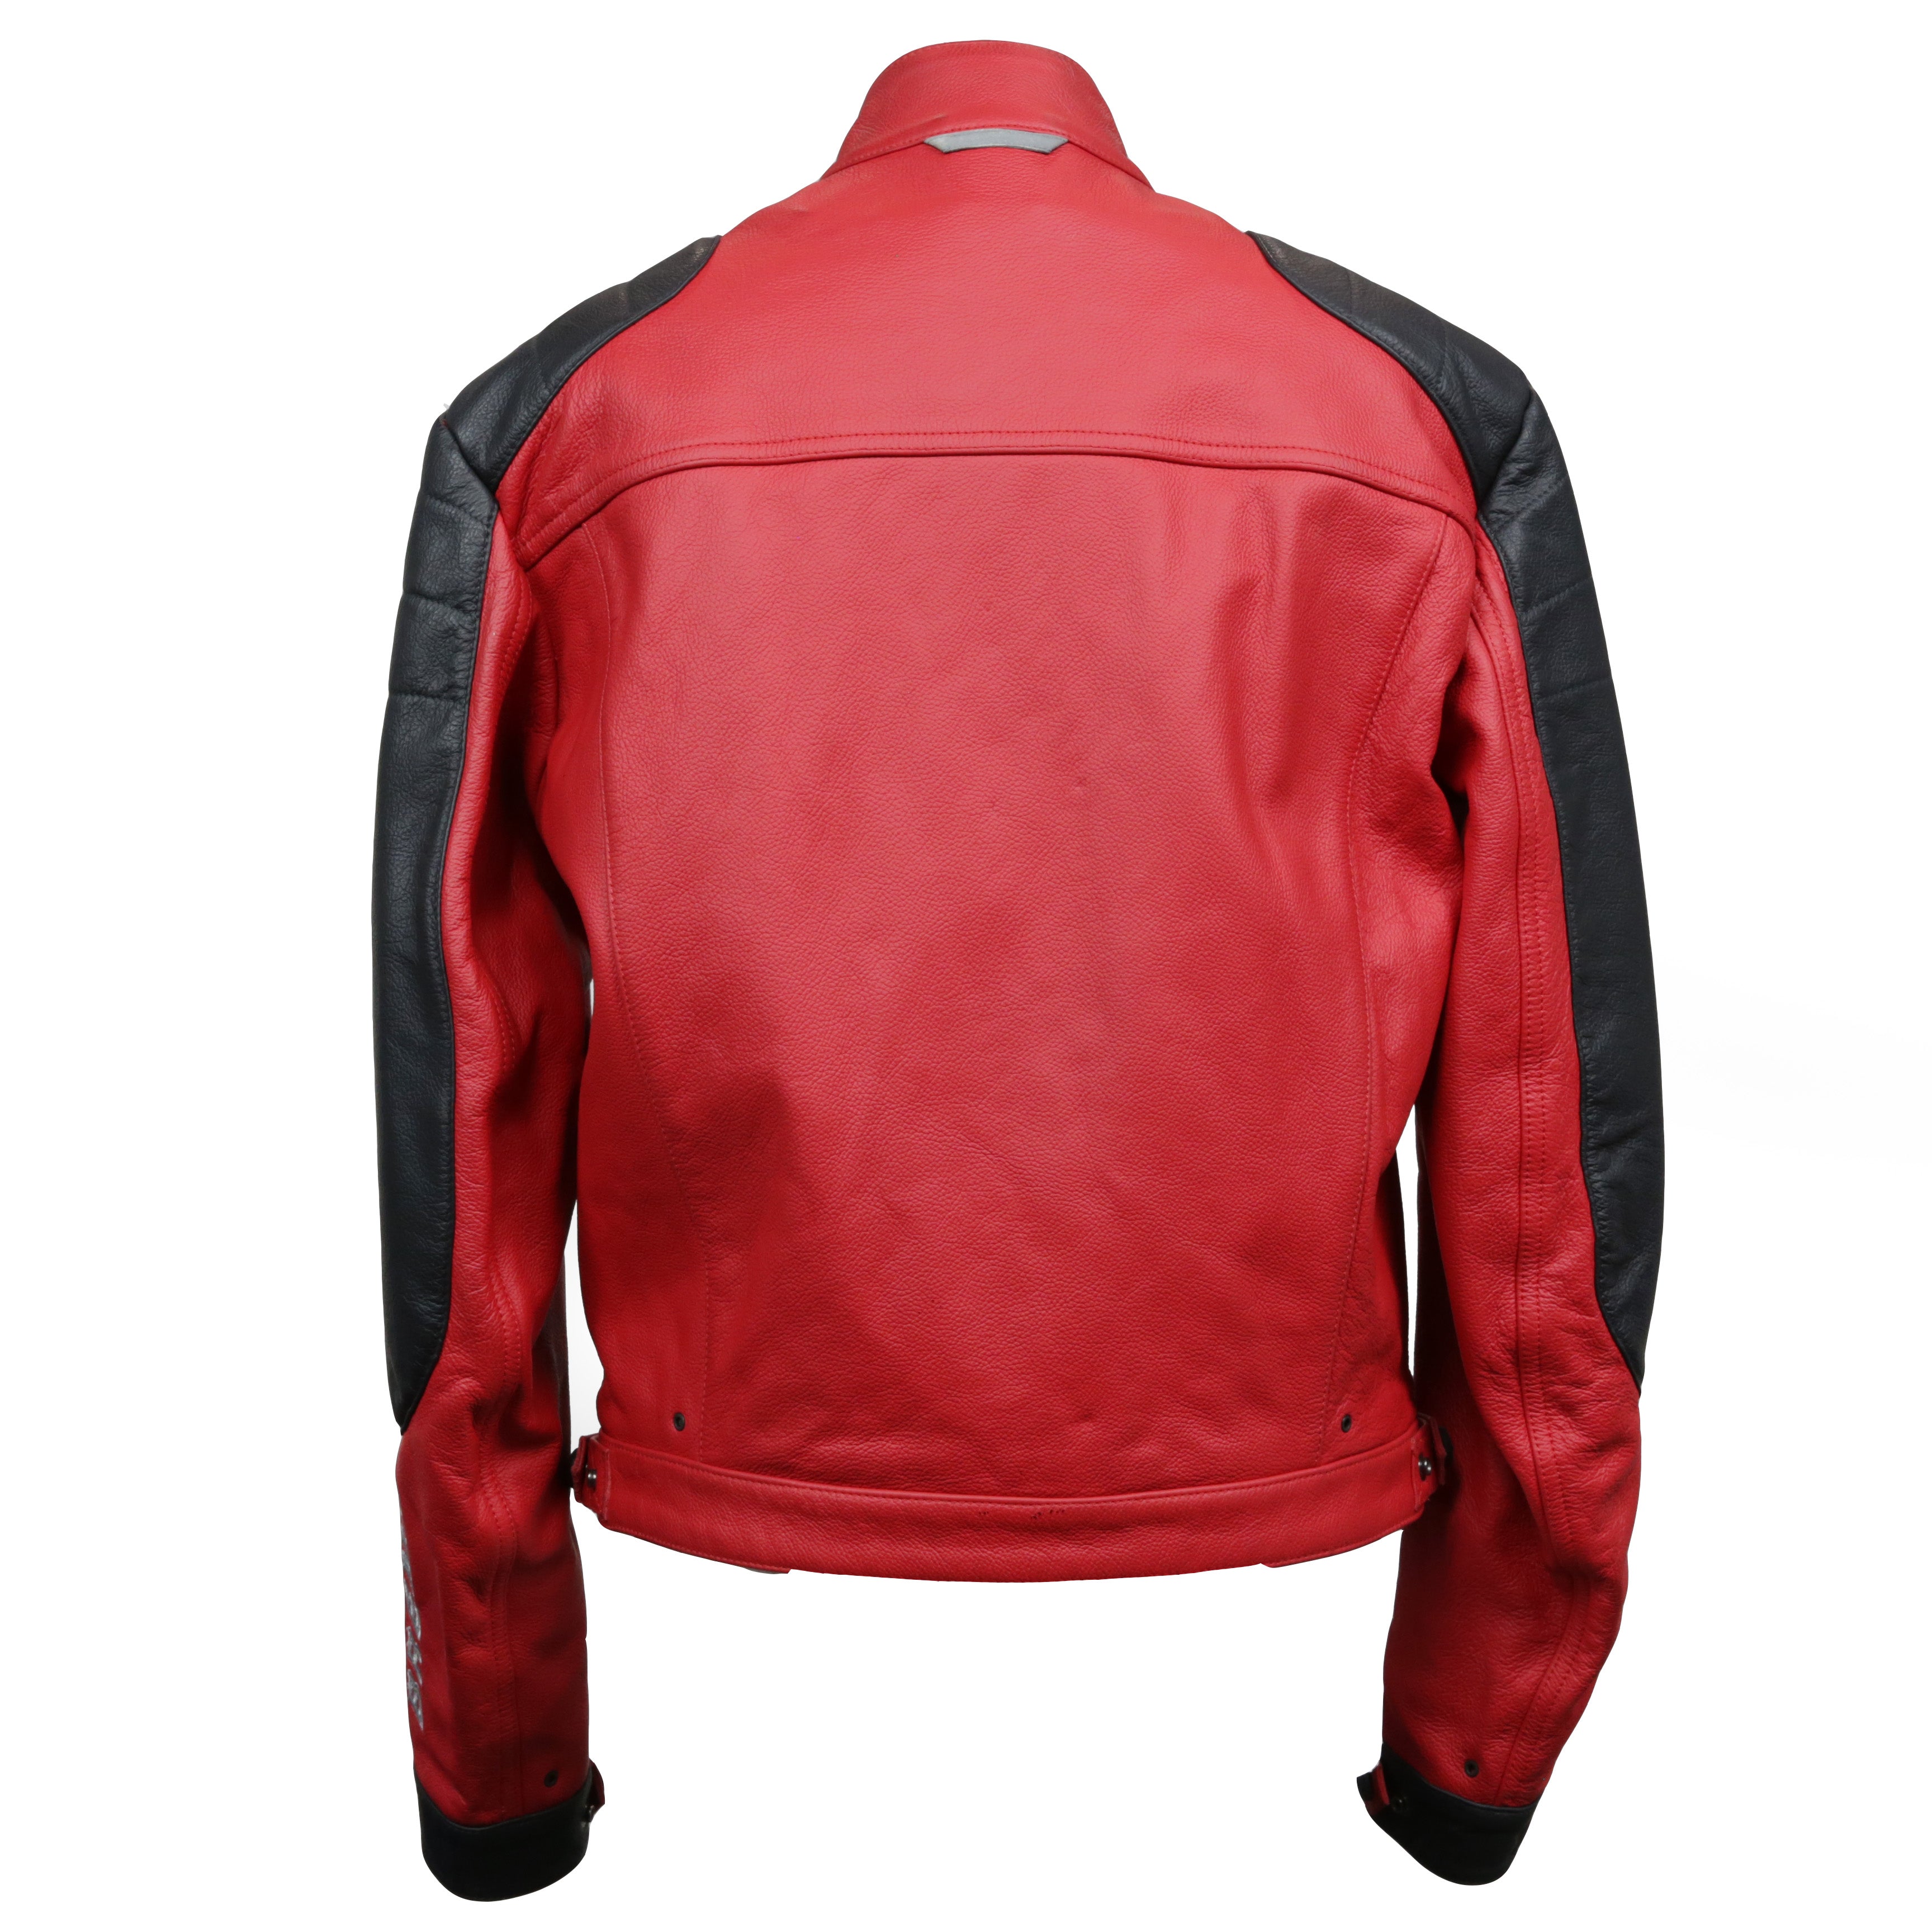 Brema Men's Leather Motorcycle Jacket - Red